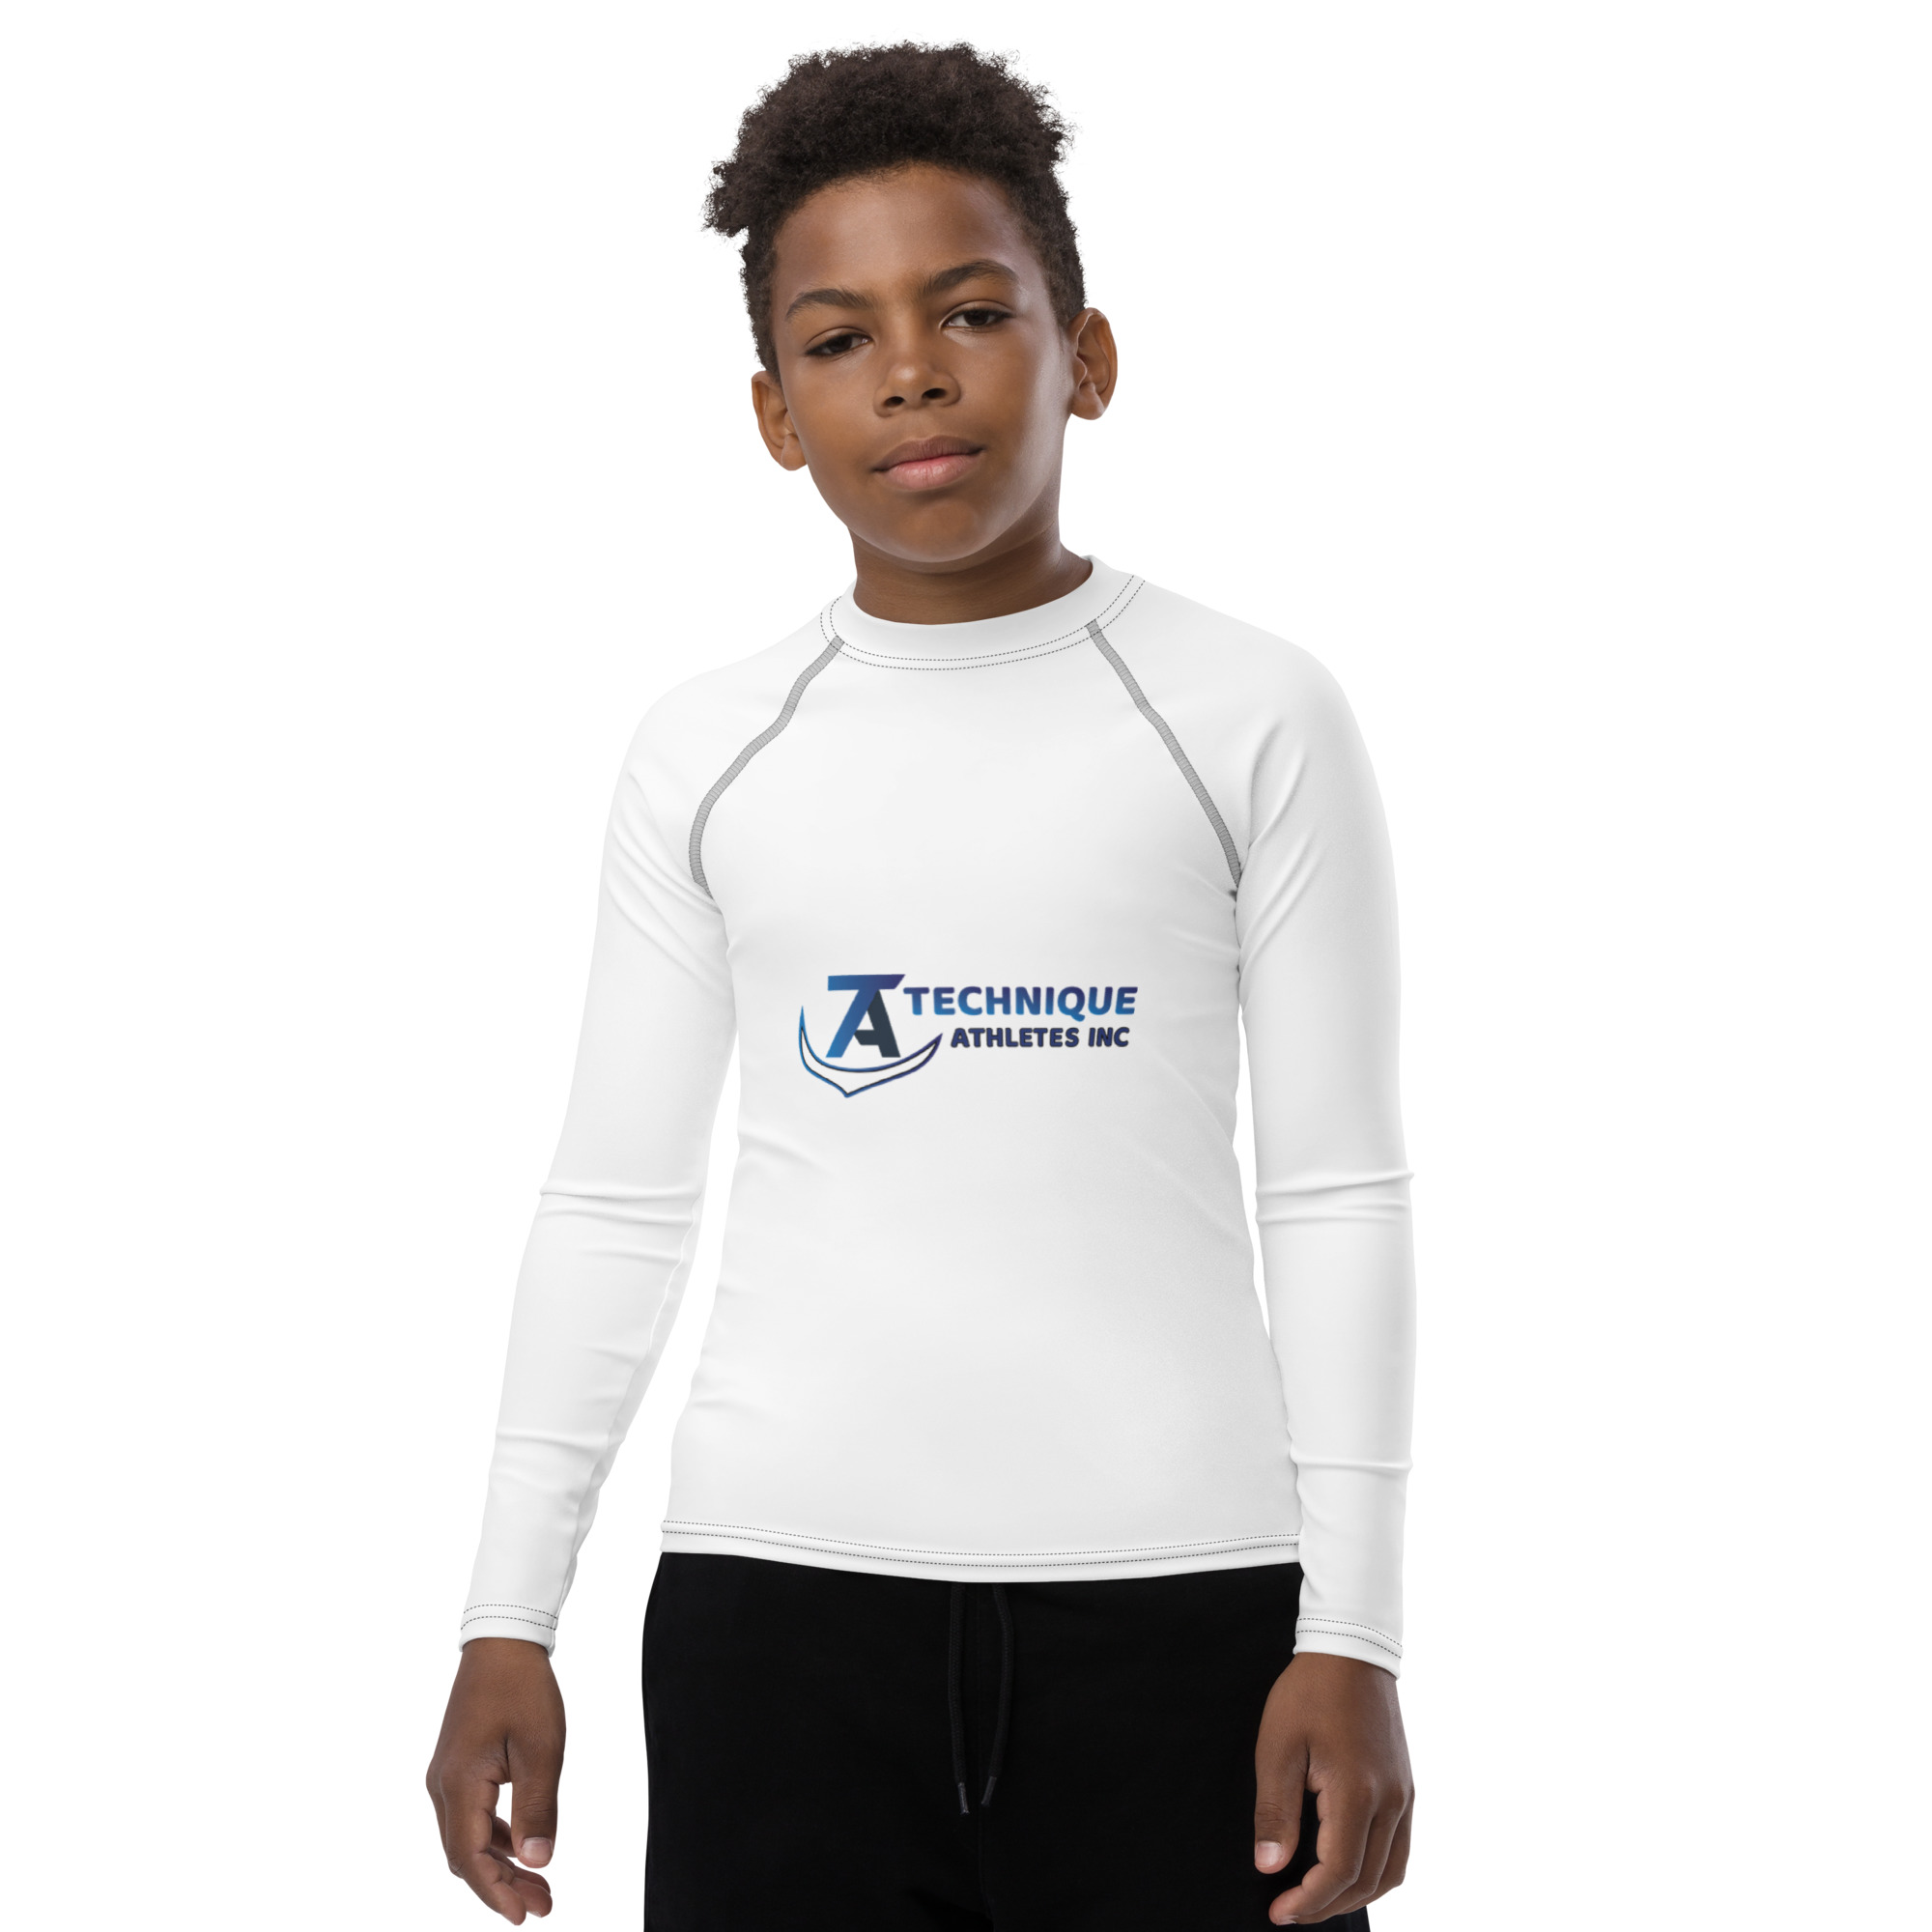 all-over-print-youth-rash-guard-white-front-6406d5c9ddf4c.jpg